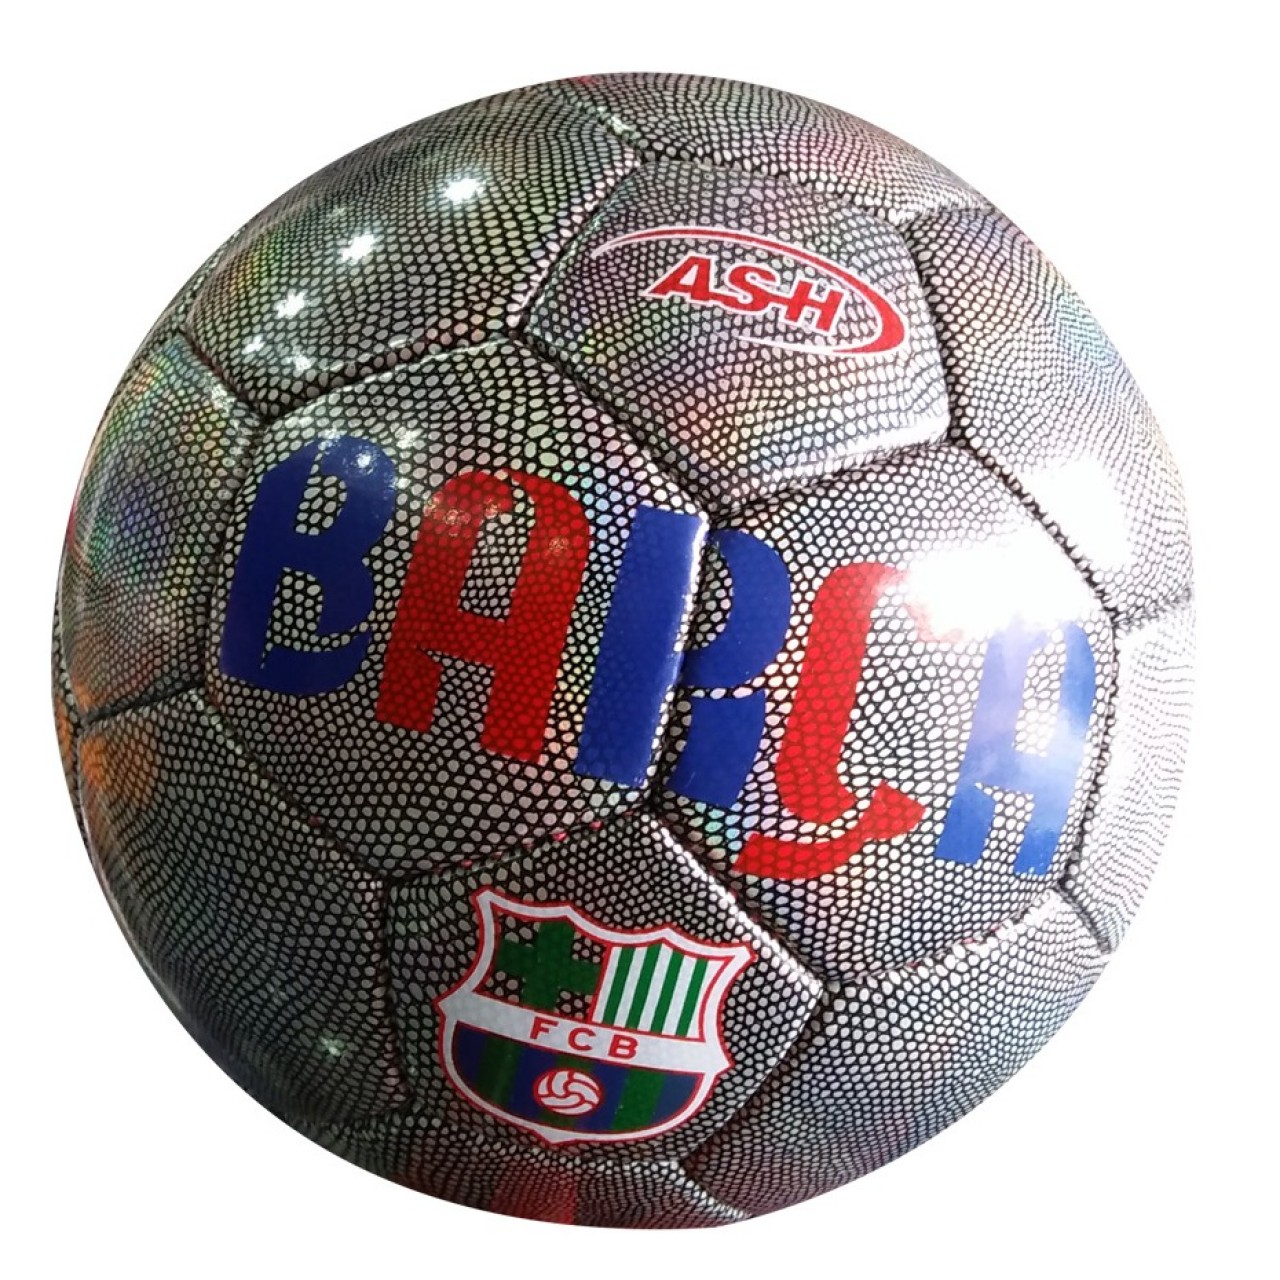 Barca Football For Outdoor Sports - Good Quality